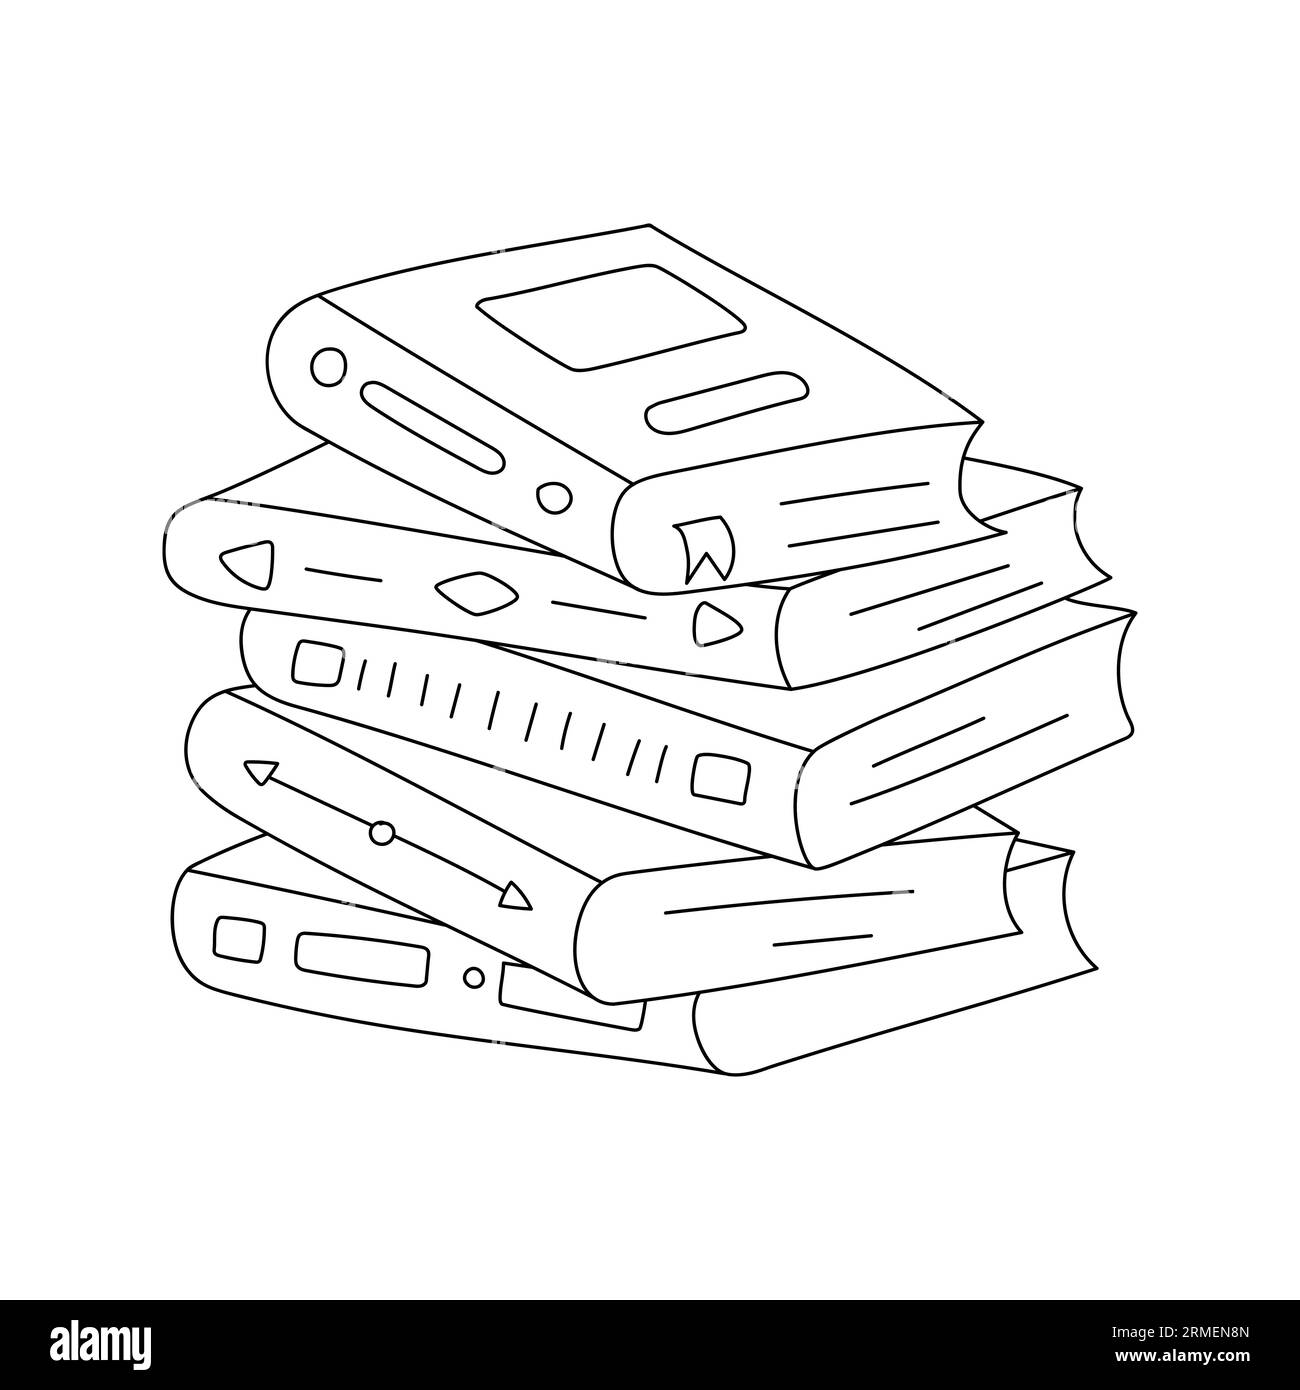 Stack of books with hardcover and book marks. Hand drawn Outline pile of books, textbooks. A symbol of reading, learning, education, science. Black wh Stock Vector